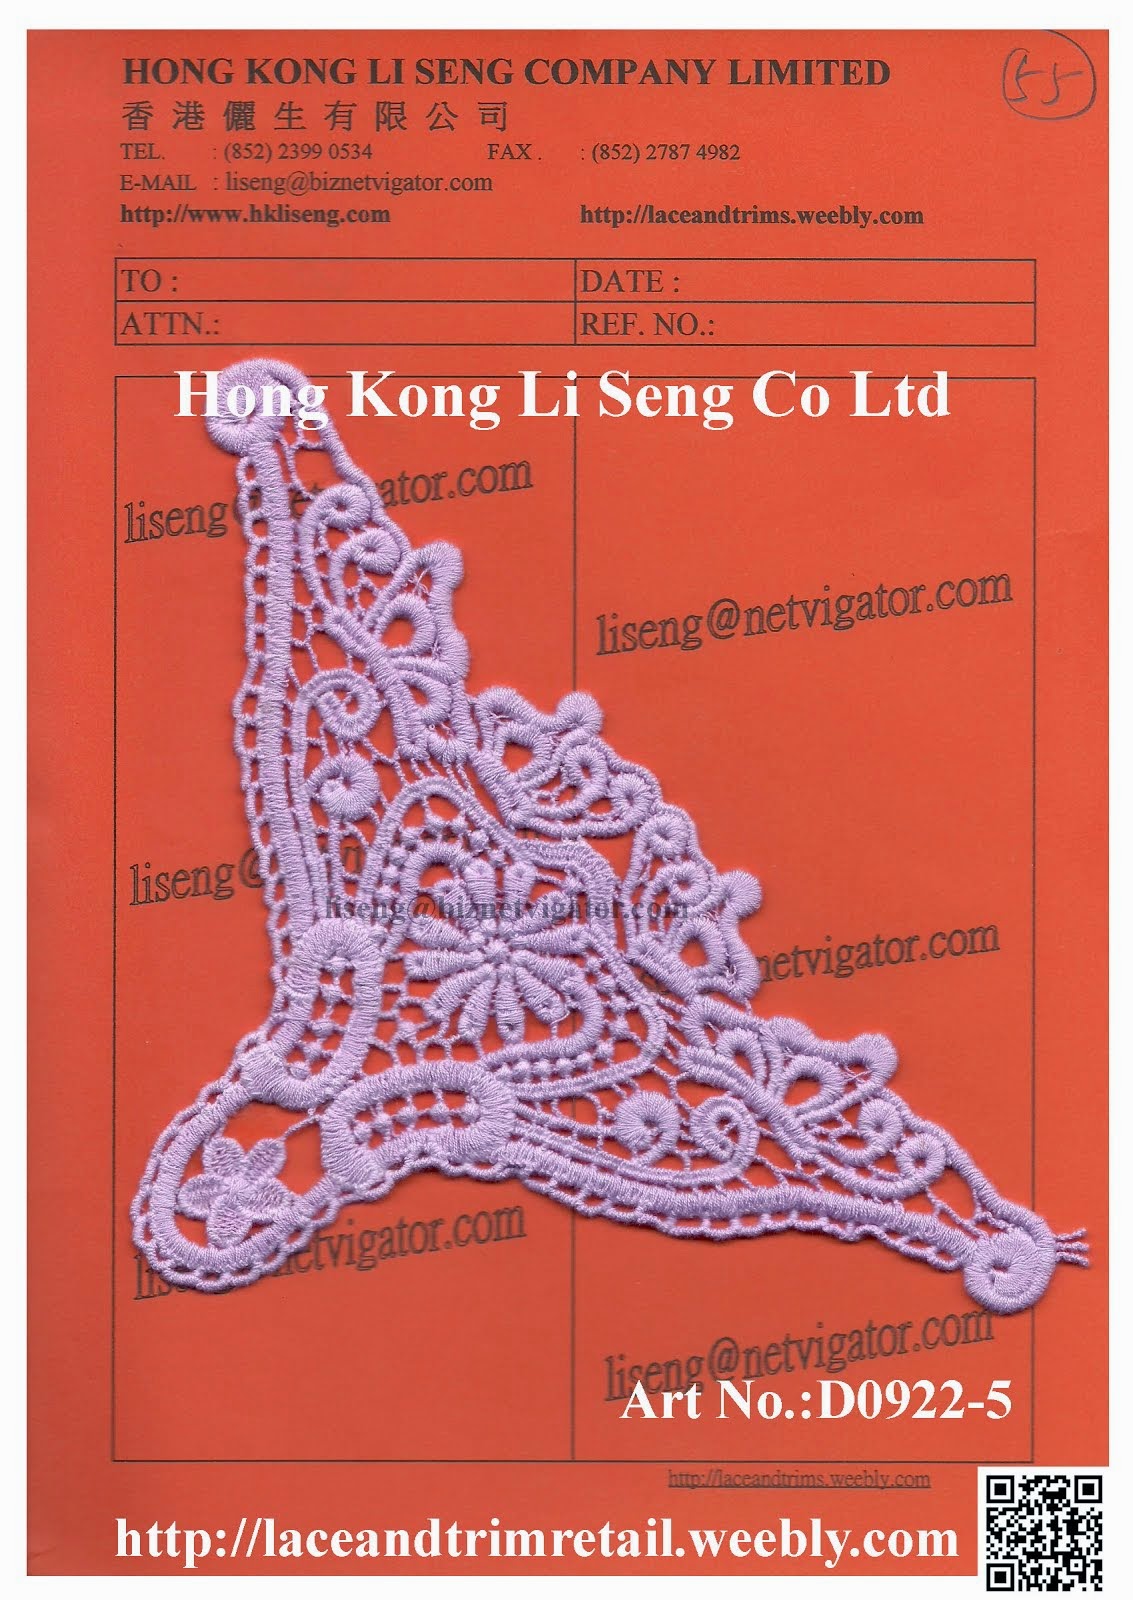 Lace and Trim Sample Retail Store